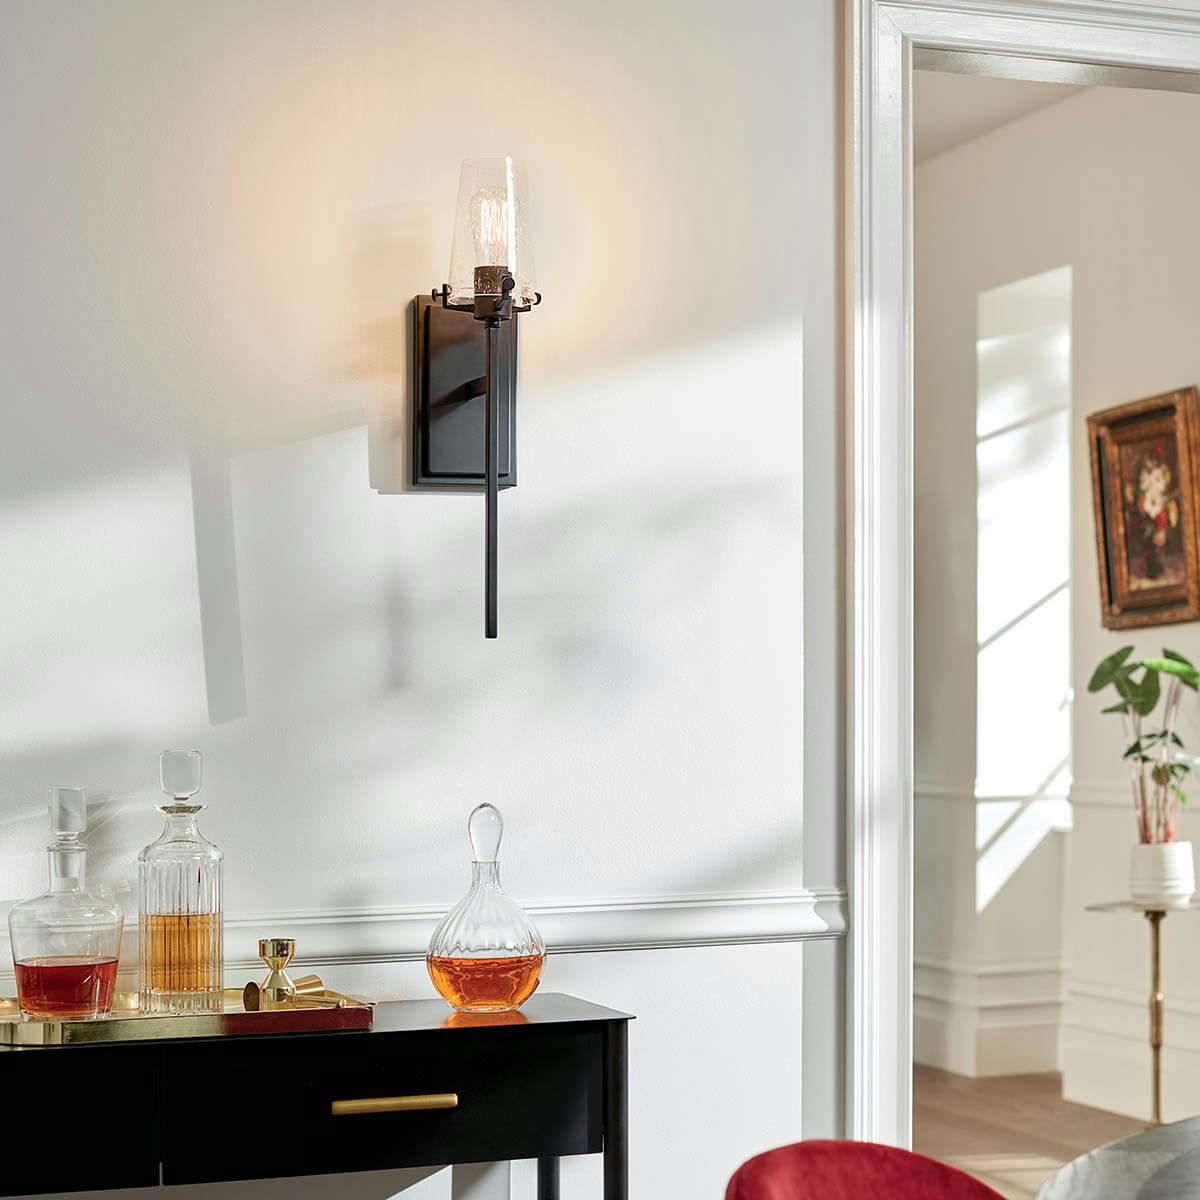 Day time dinin room with Alton 1 Light Wall Sconce Black